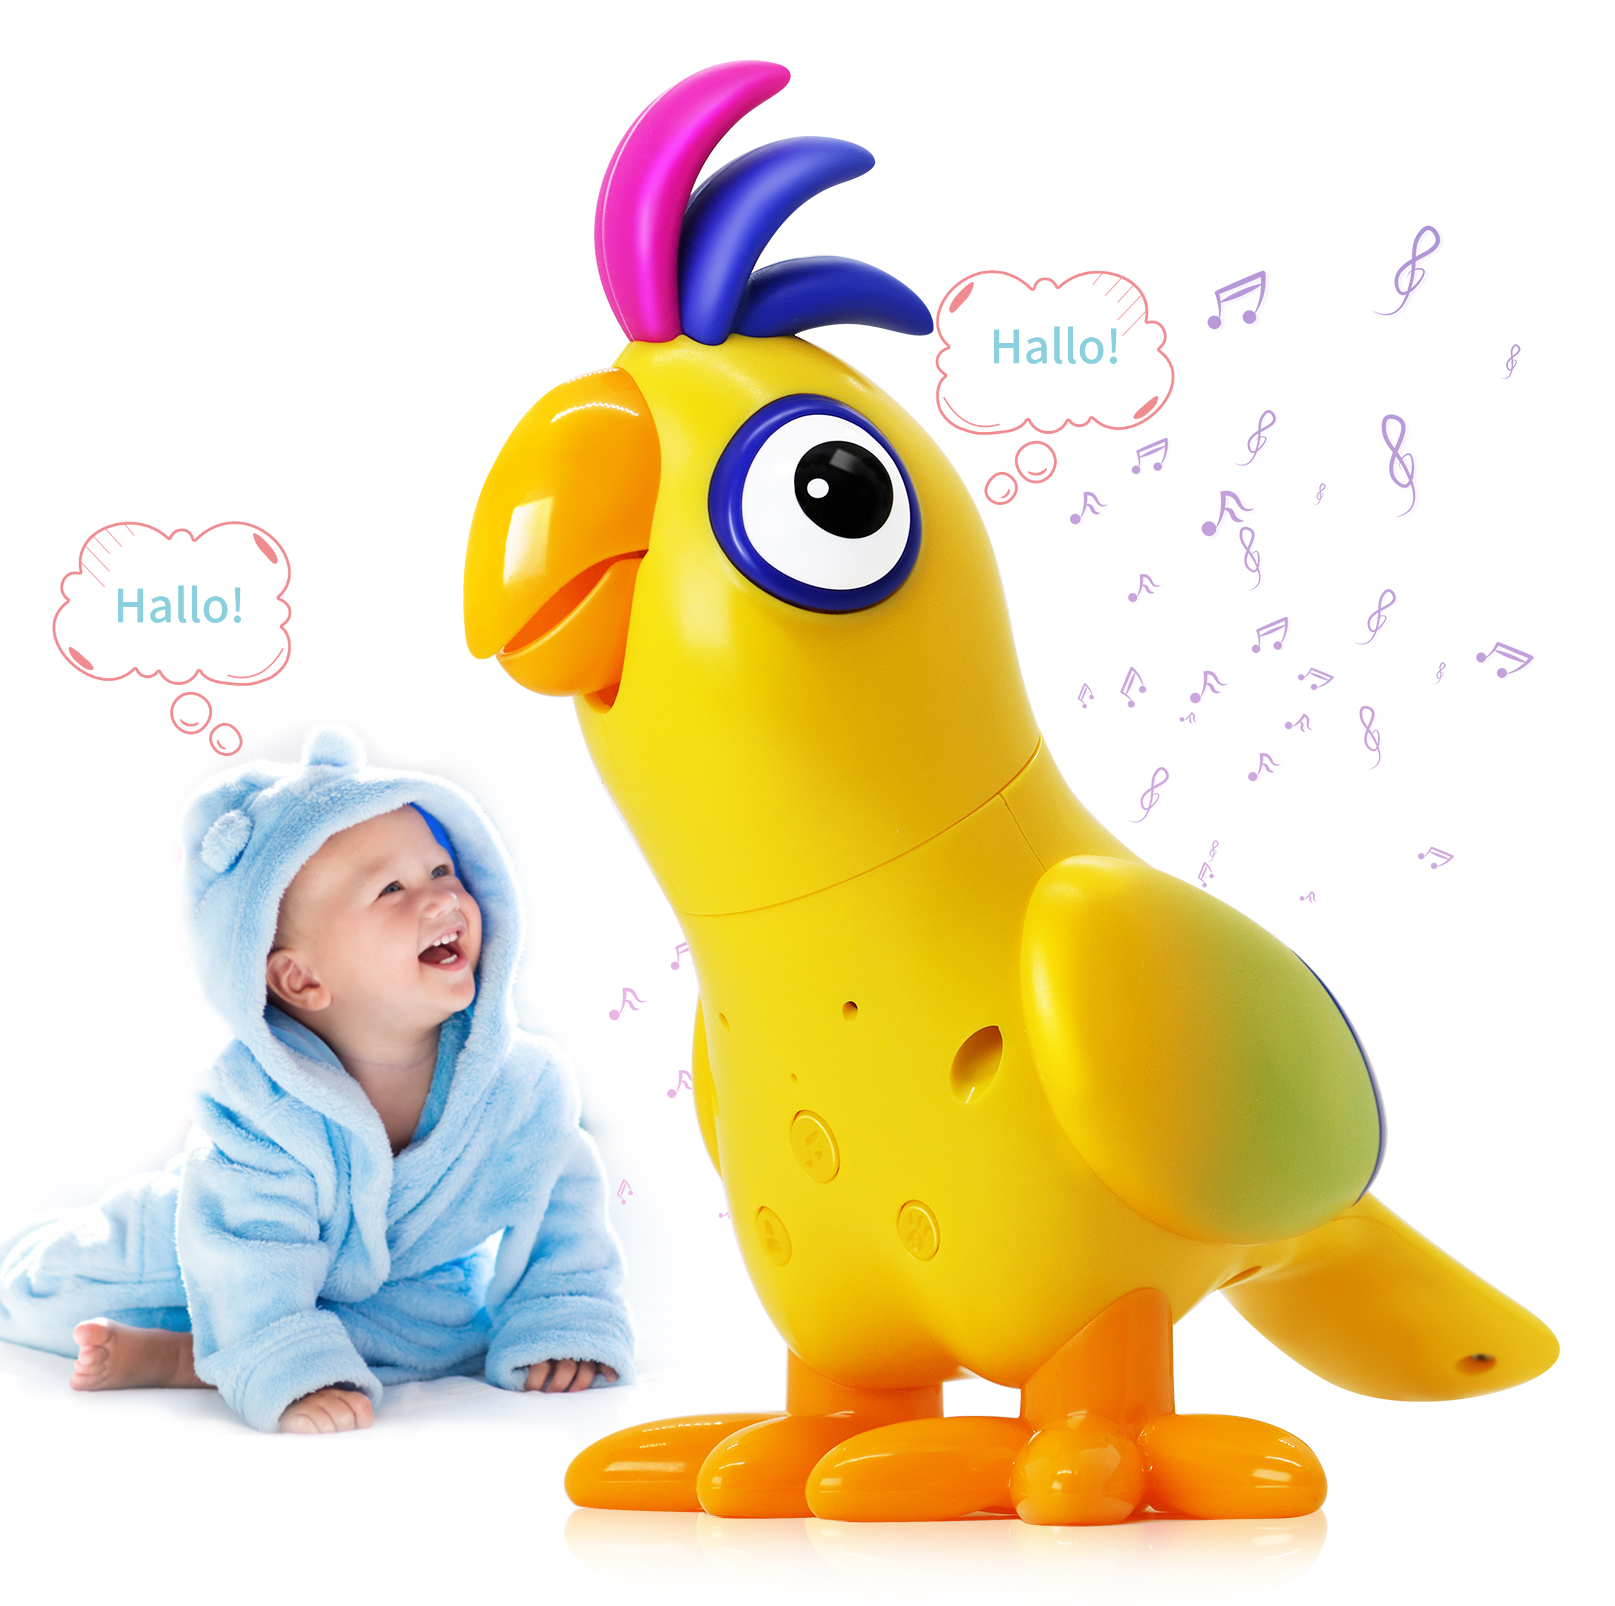 Talking Parrot Toys for Kids, Singing Recording Repeat What You Say Funny Education Toys for Children, Musical Toy for Kids | Star of Baby